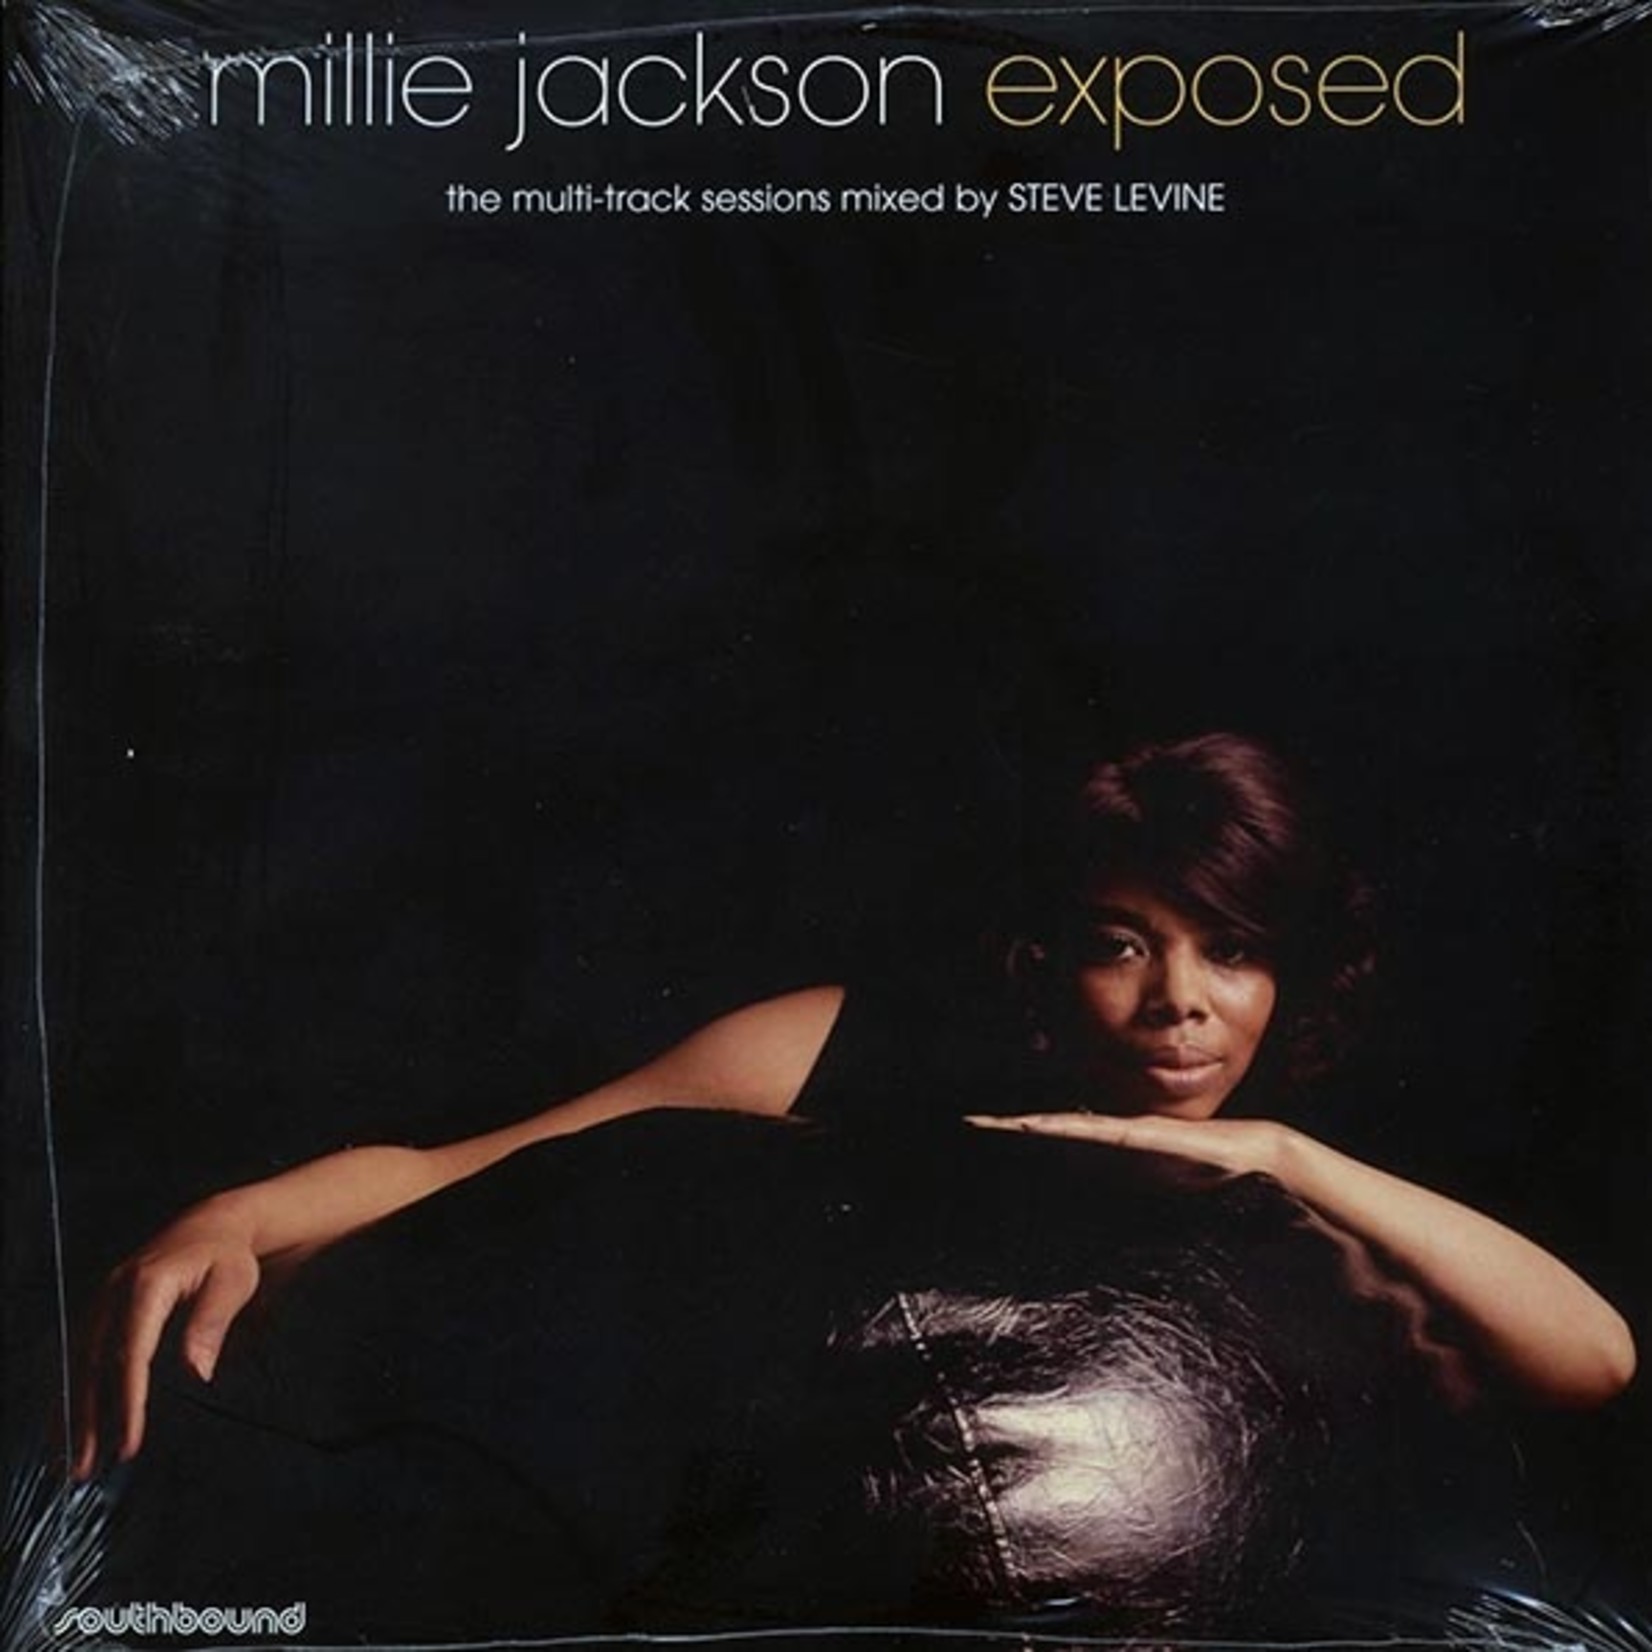 Millie Jackson - Exposed: The Multi-track Sessions Mixed By Steve Levine (Ace Records/Southbound)